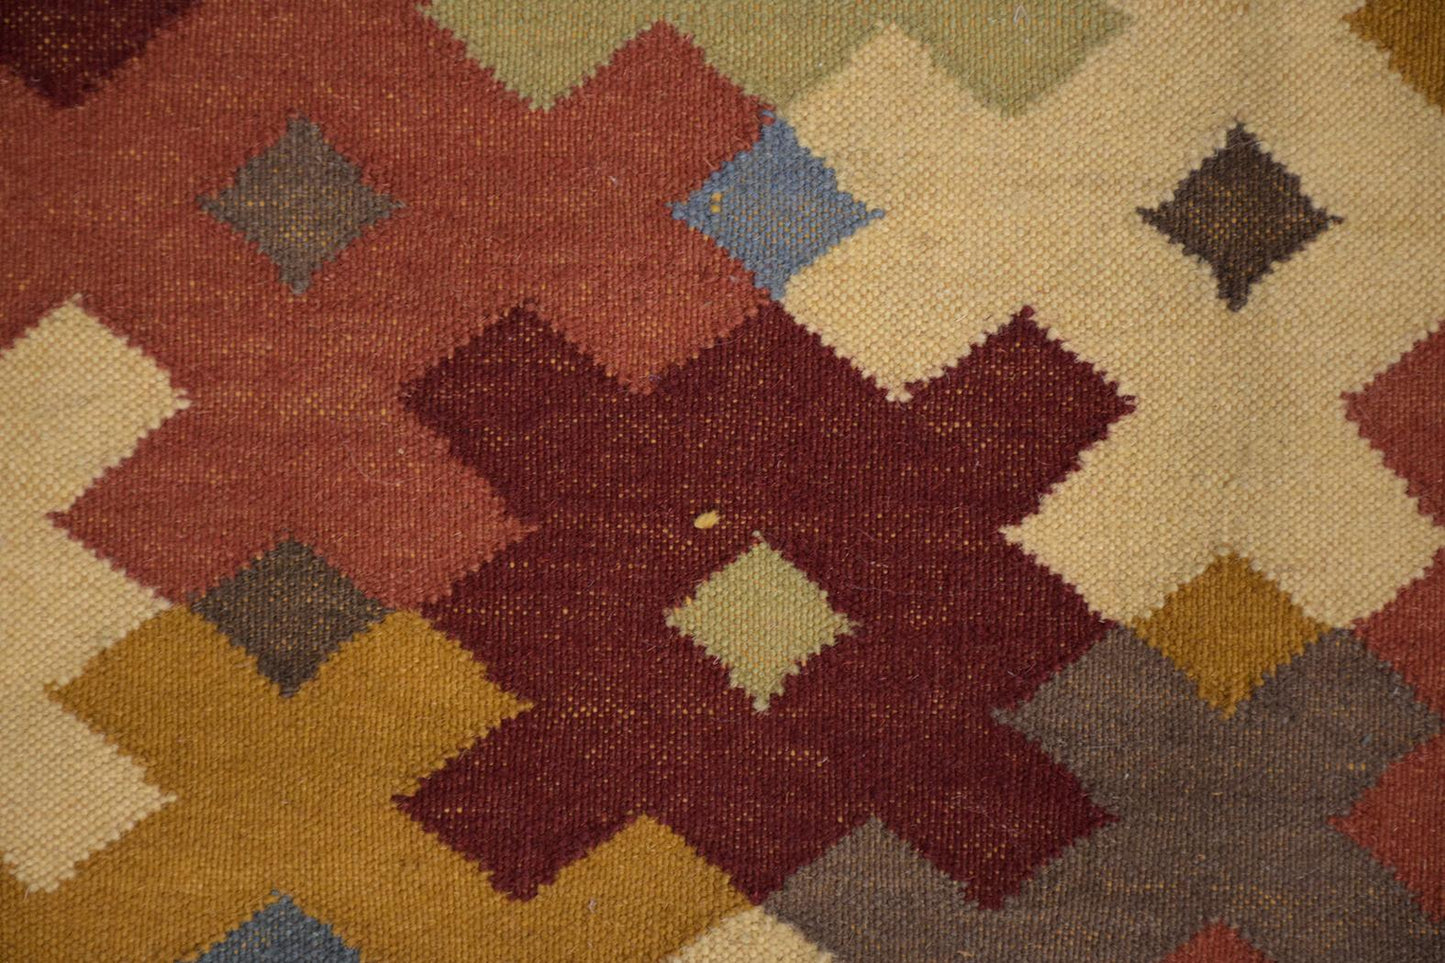 Early 1900s Multicolor Symmetrical Pattern Textile Rug: Perfect for Sophisticated Spaces